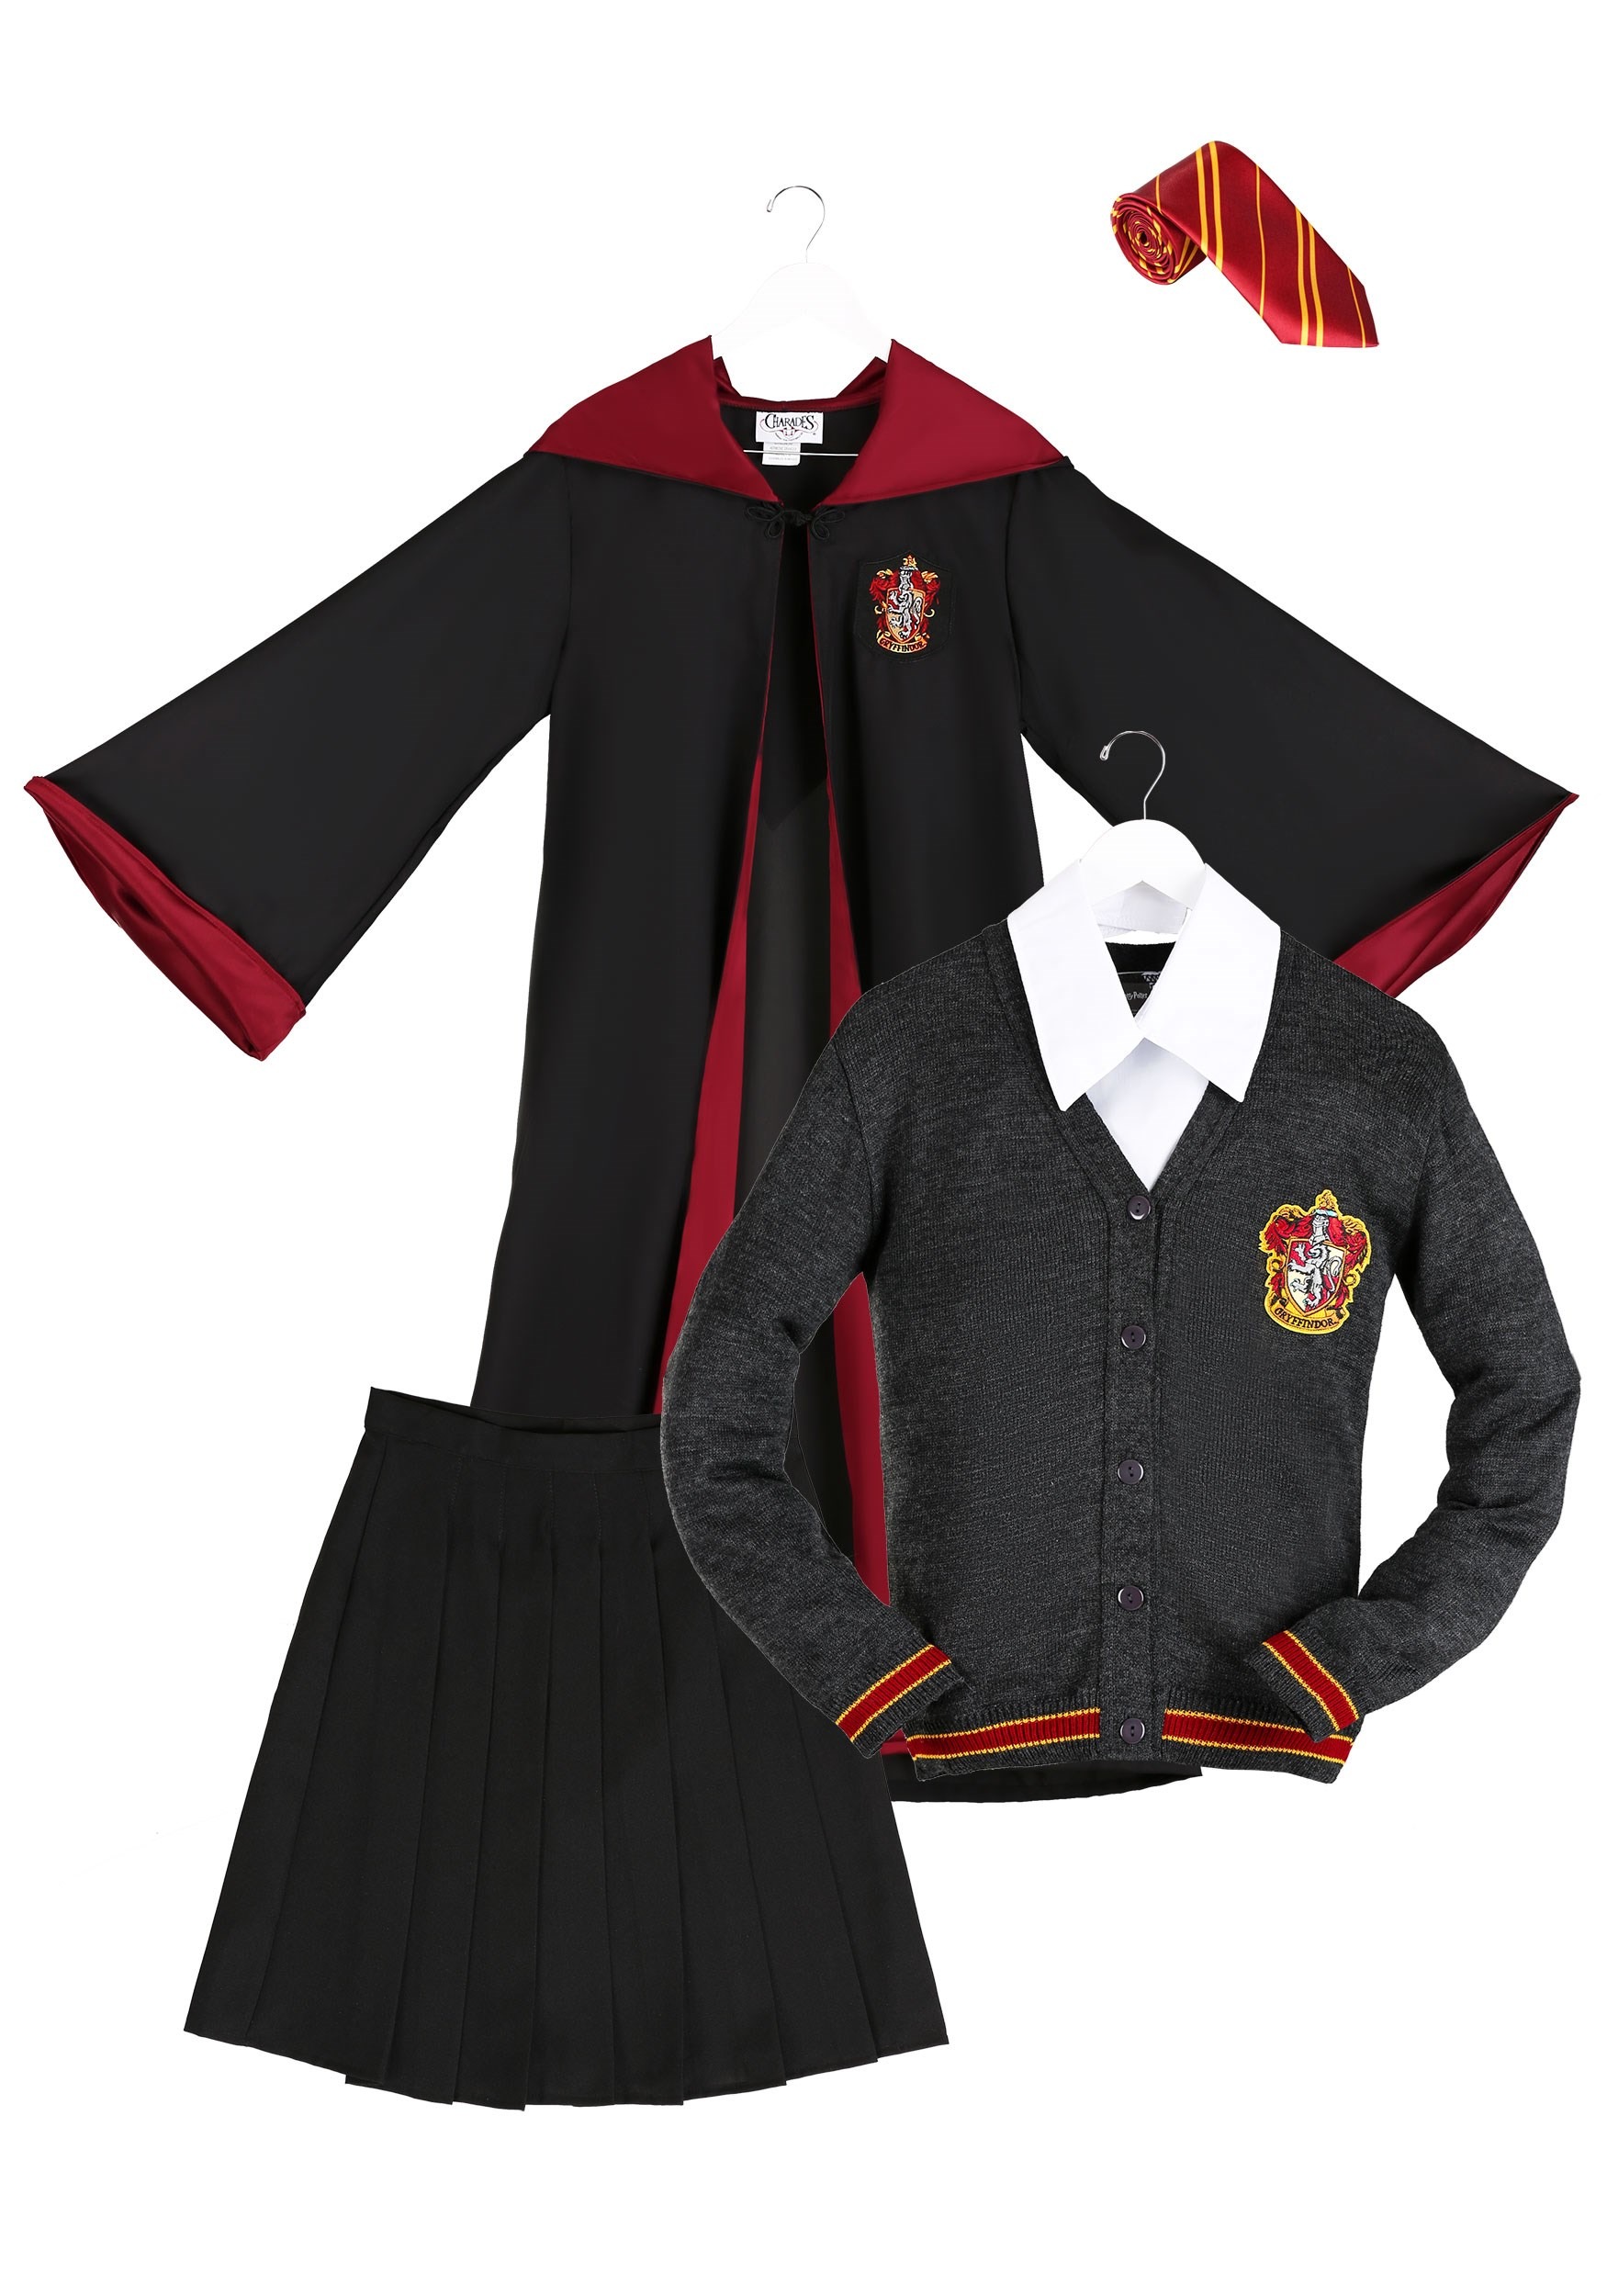 Plus Size Hermione Women's Costume from Harry Potter